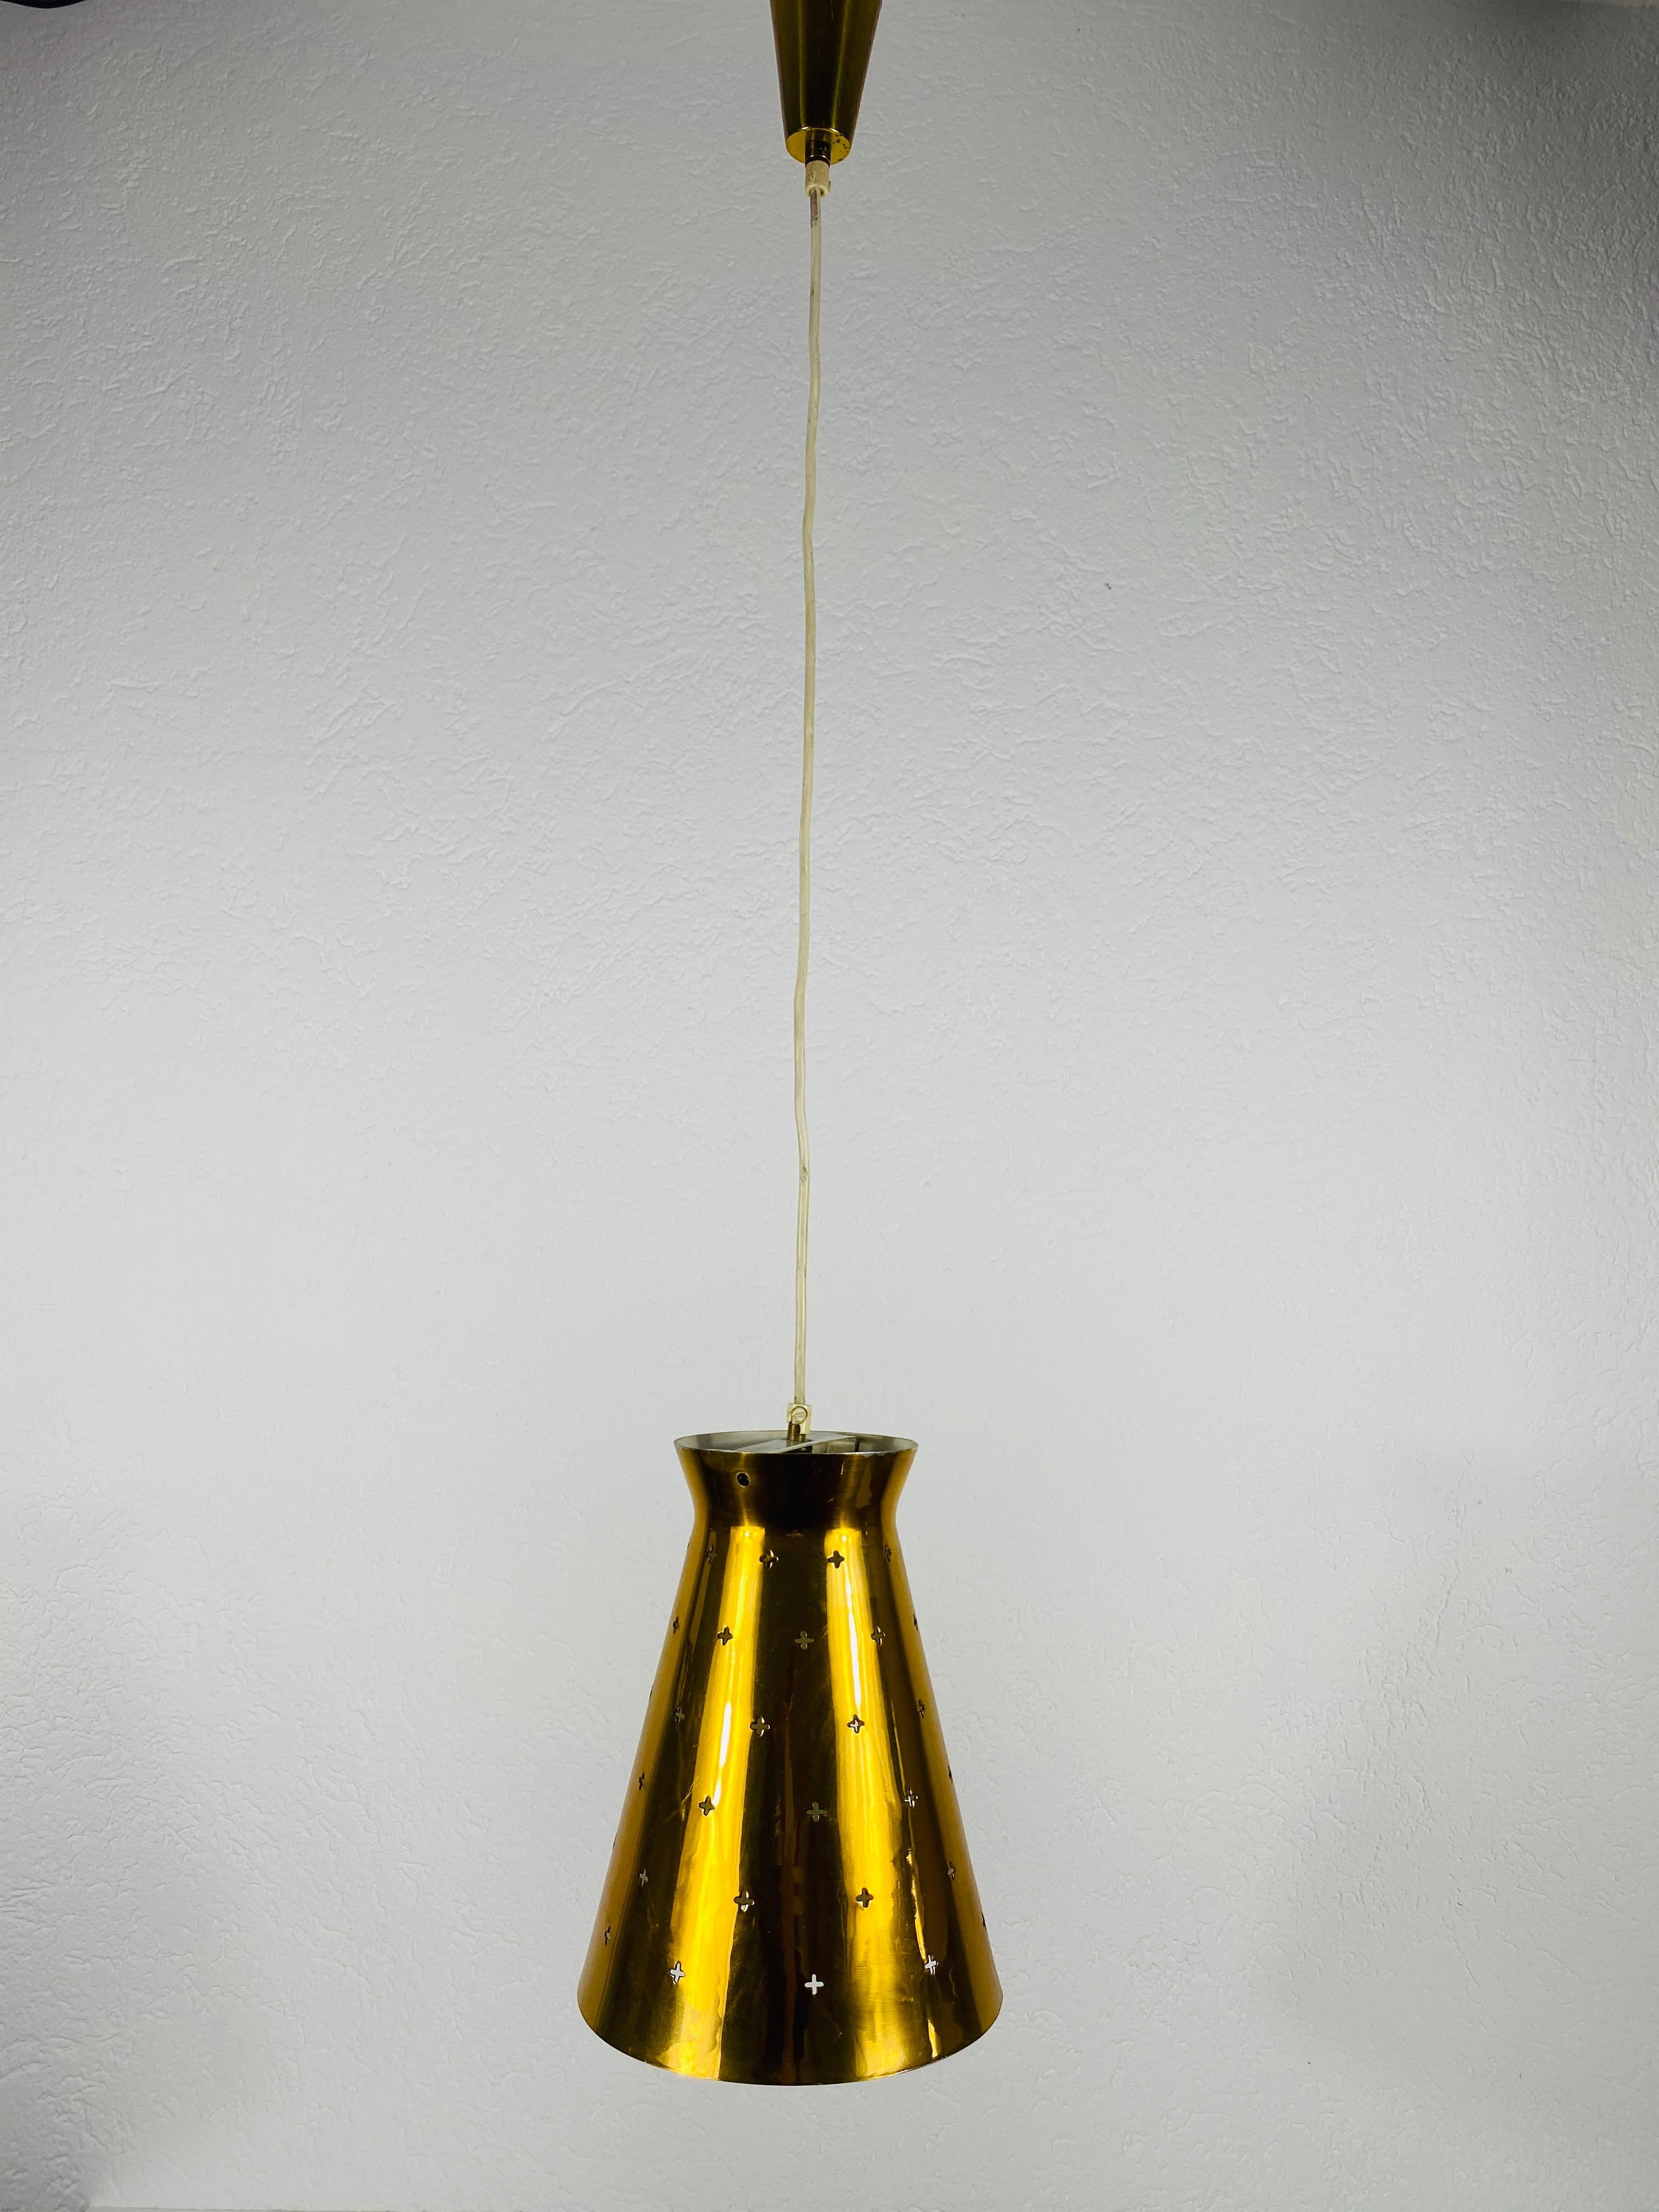 Mid-20th Century Polished Brass Pendant Lamp in the Style of Paavo Tynell, 1950s For Sale